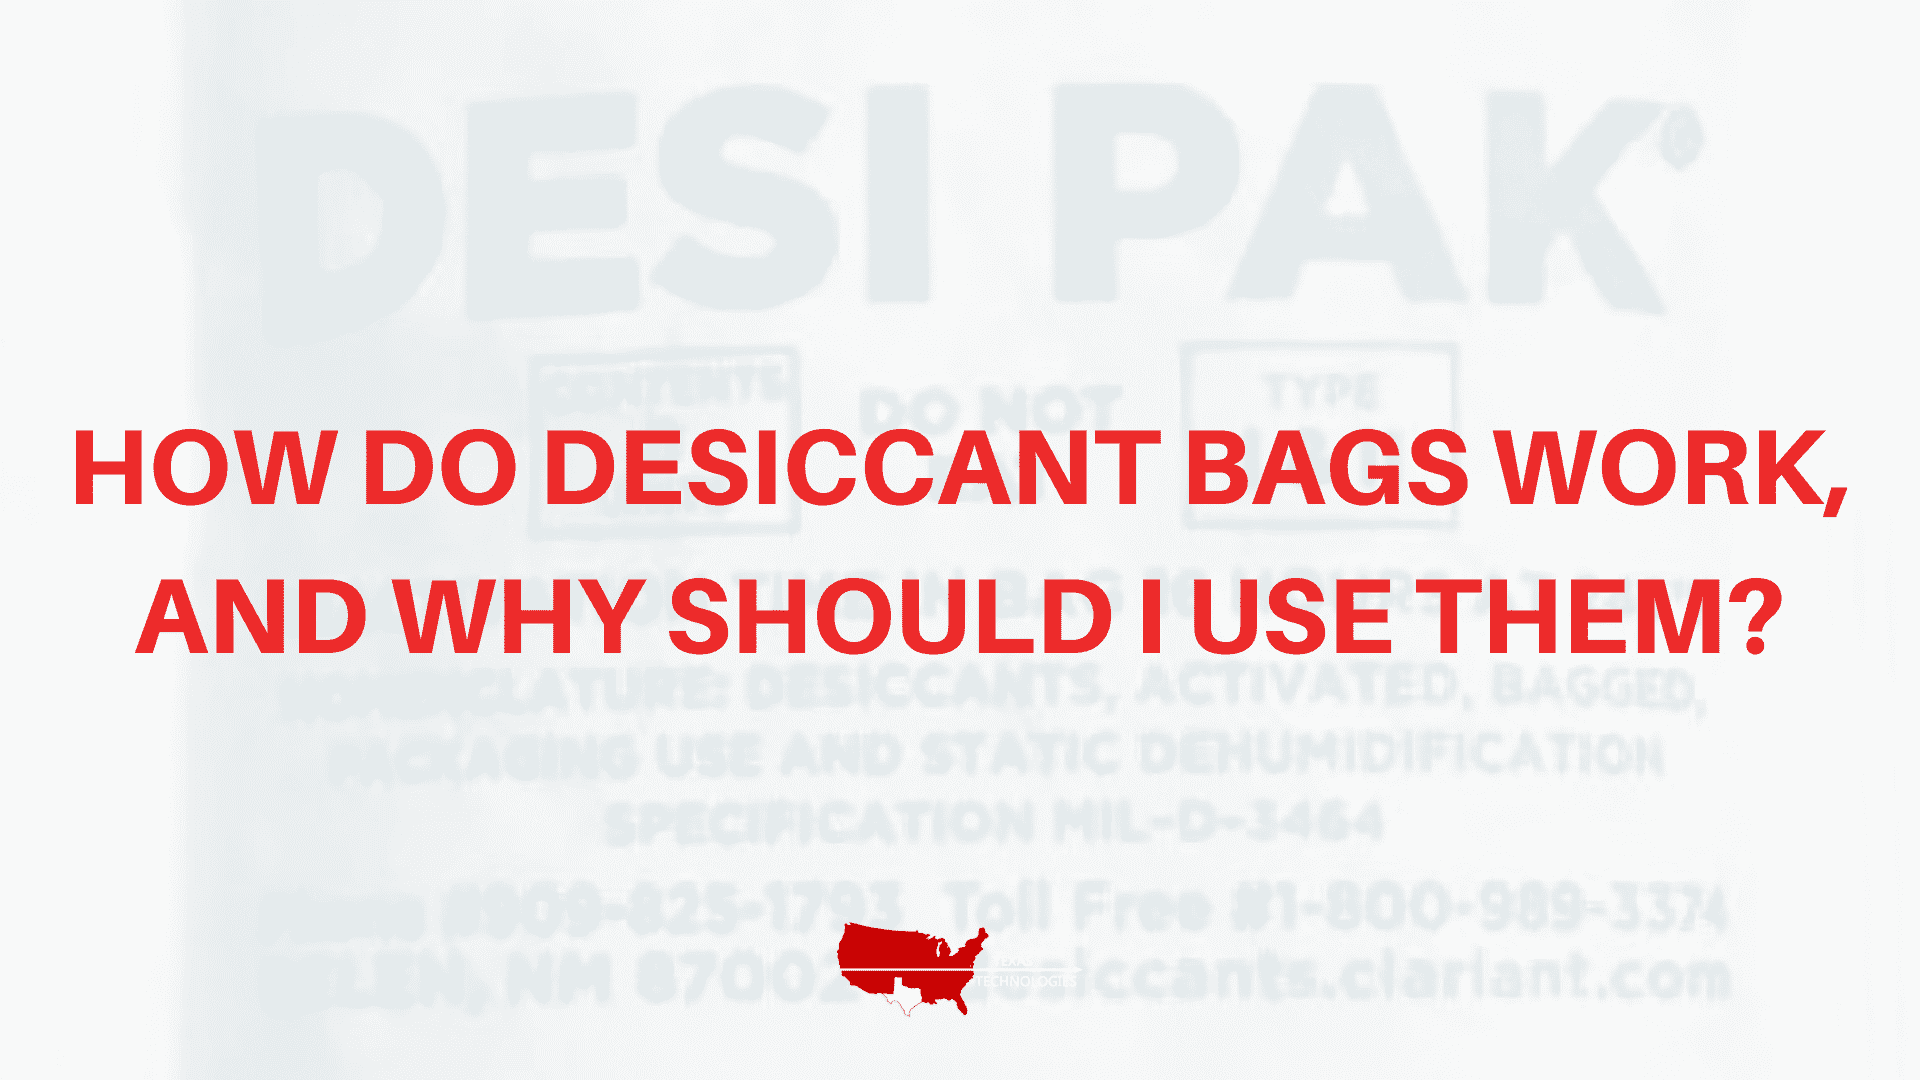 How Do Desiccant Bags Work, And Why Should I Use Them?